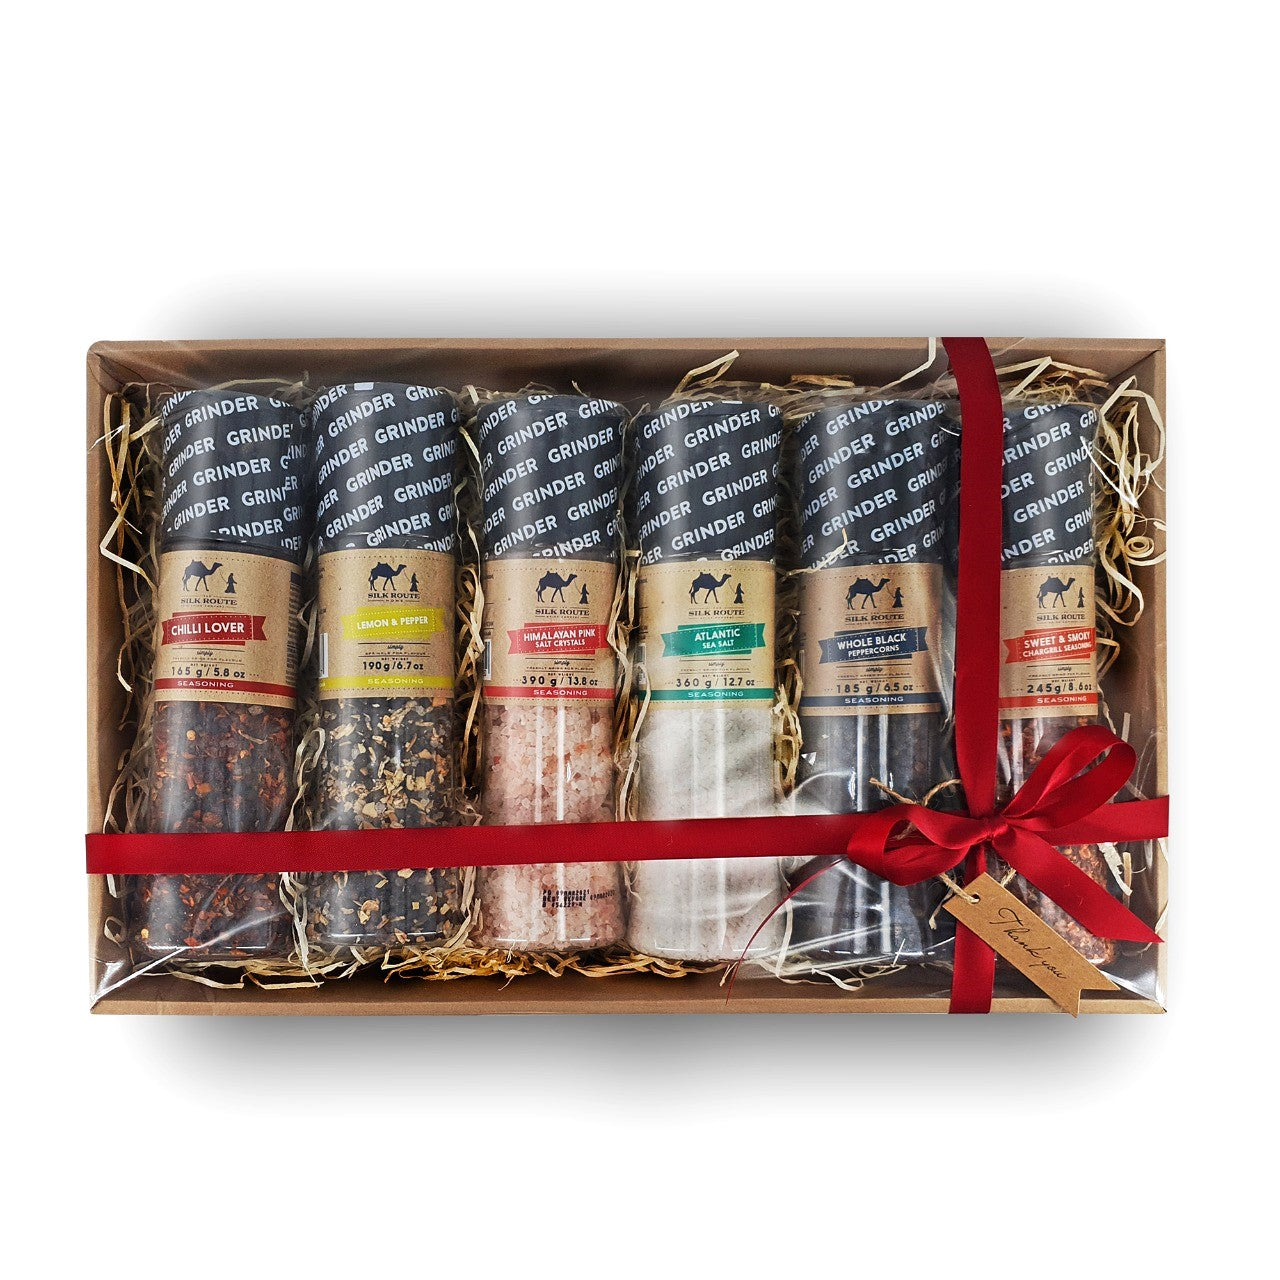 6x Giant Spice Grinder Gift Tray